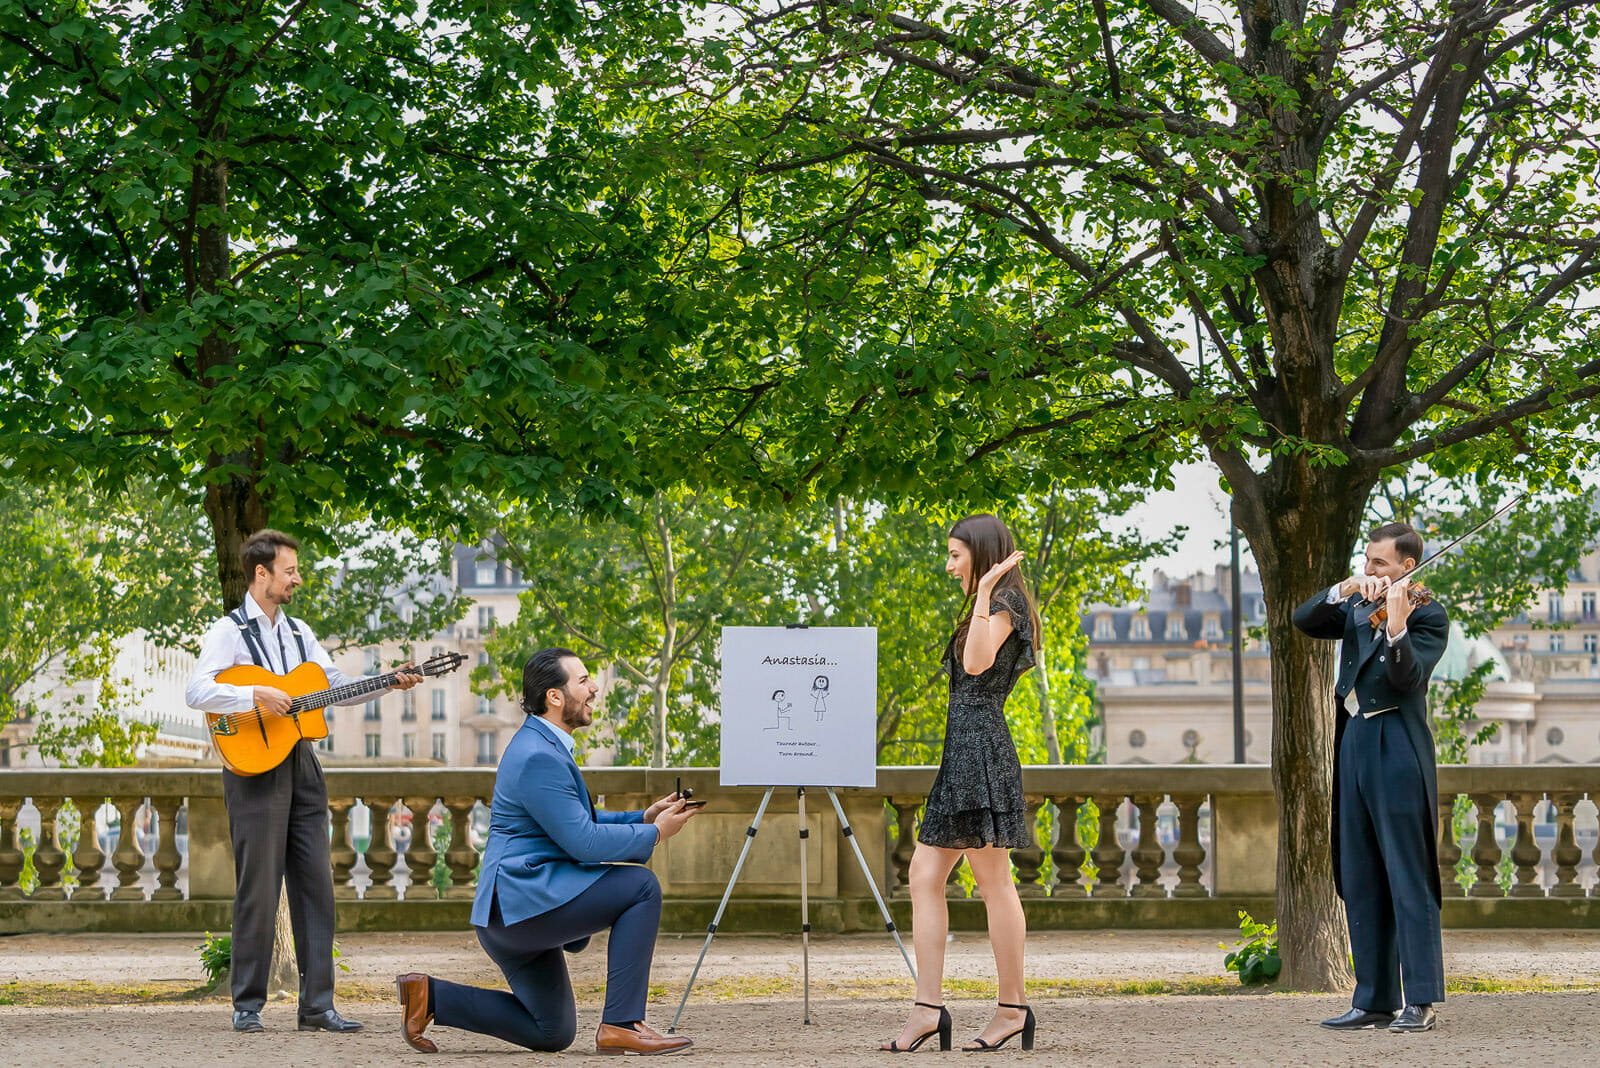 Cute Paris proposal ideas in the Tuileries Garden with musicians